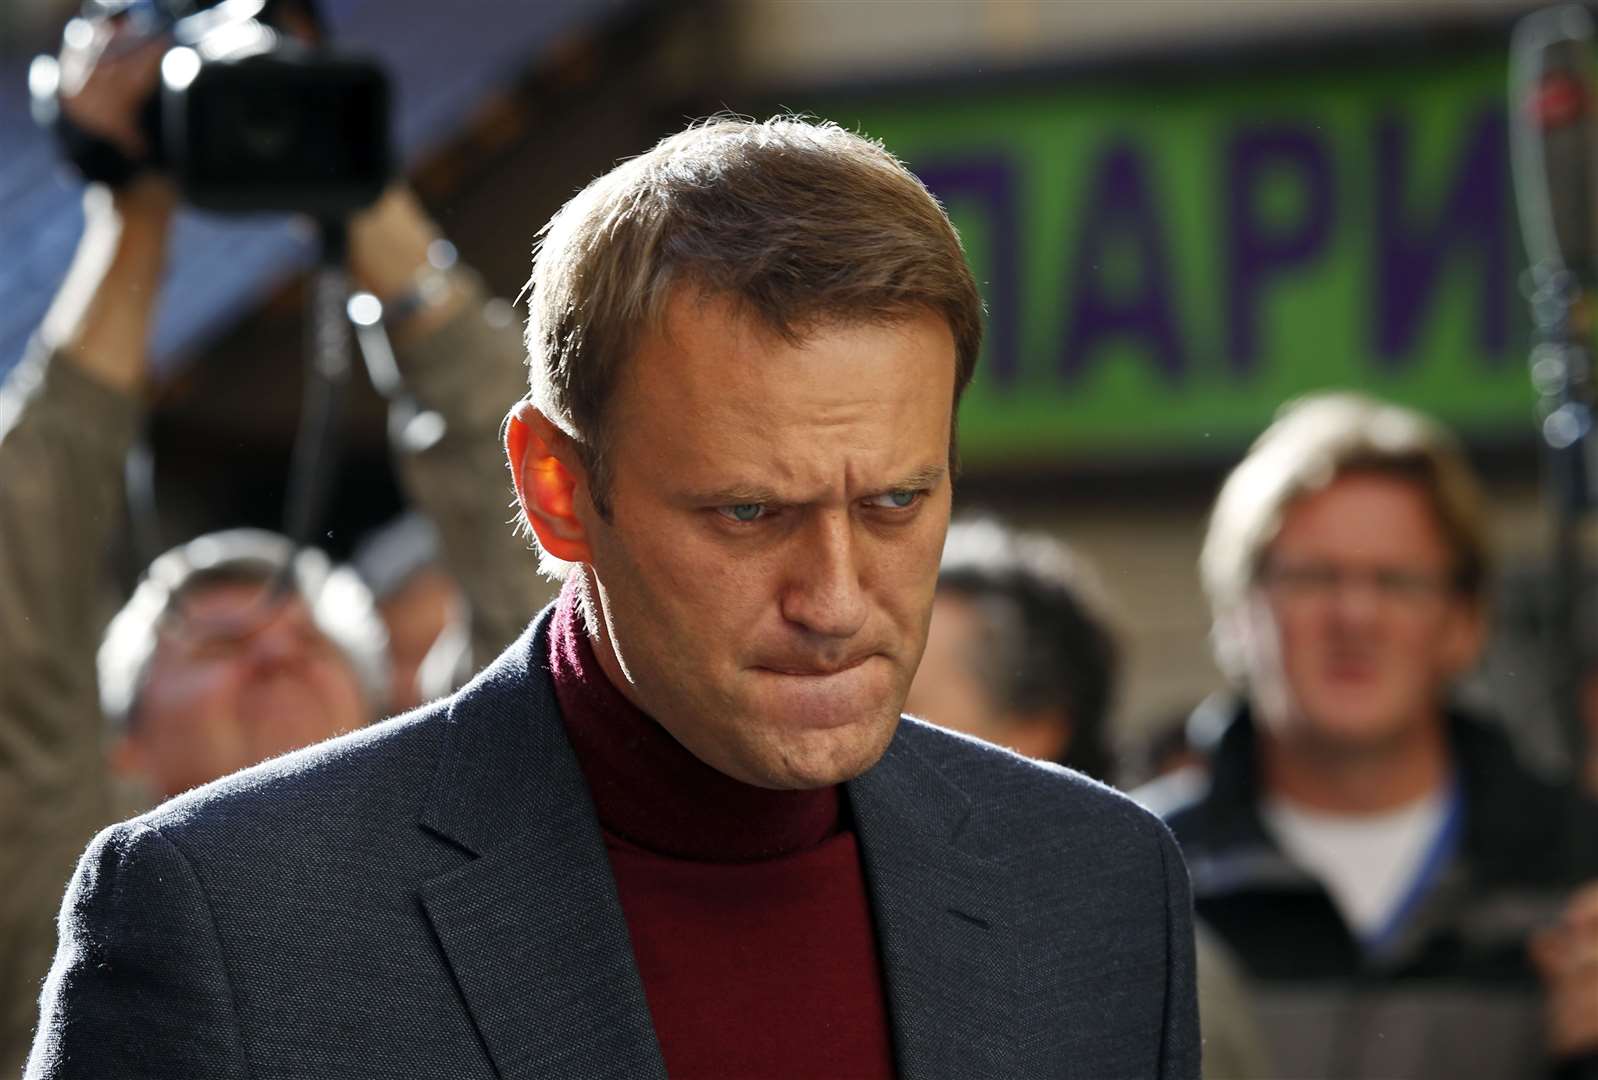 Mr Navalny had crusaded against official corruption and staged massive anti-Kremlin protests (Alexander Zemlianichenko/AP)